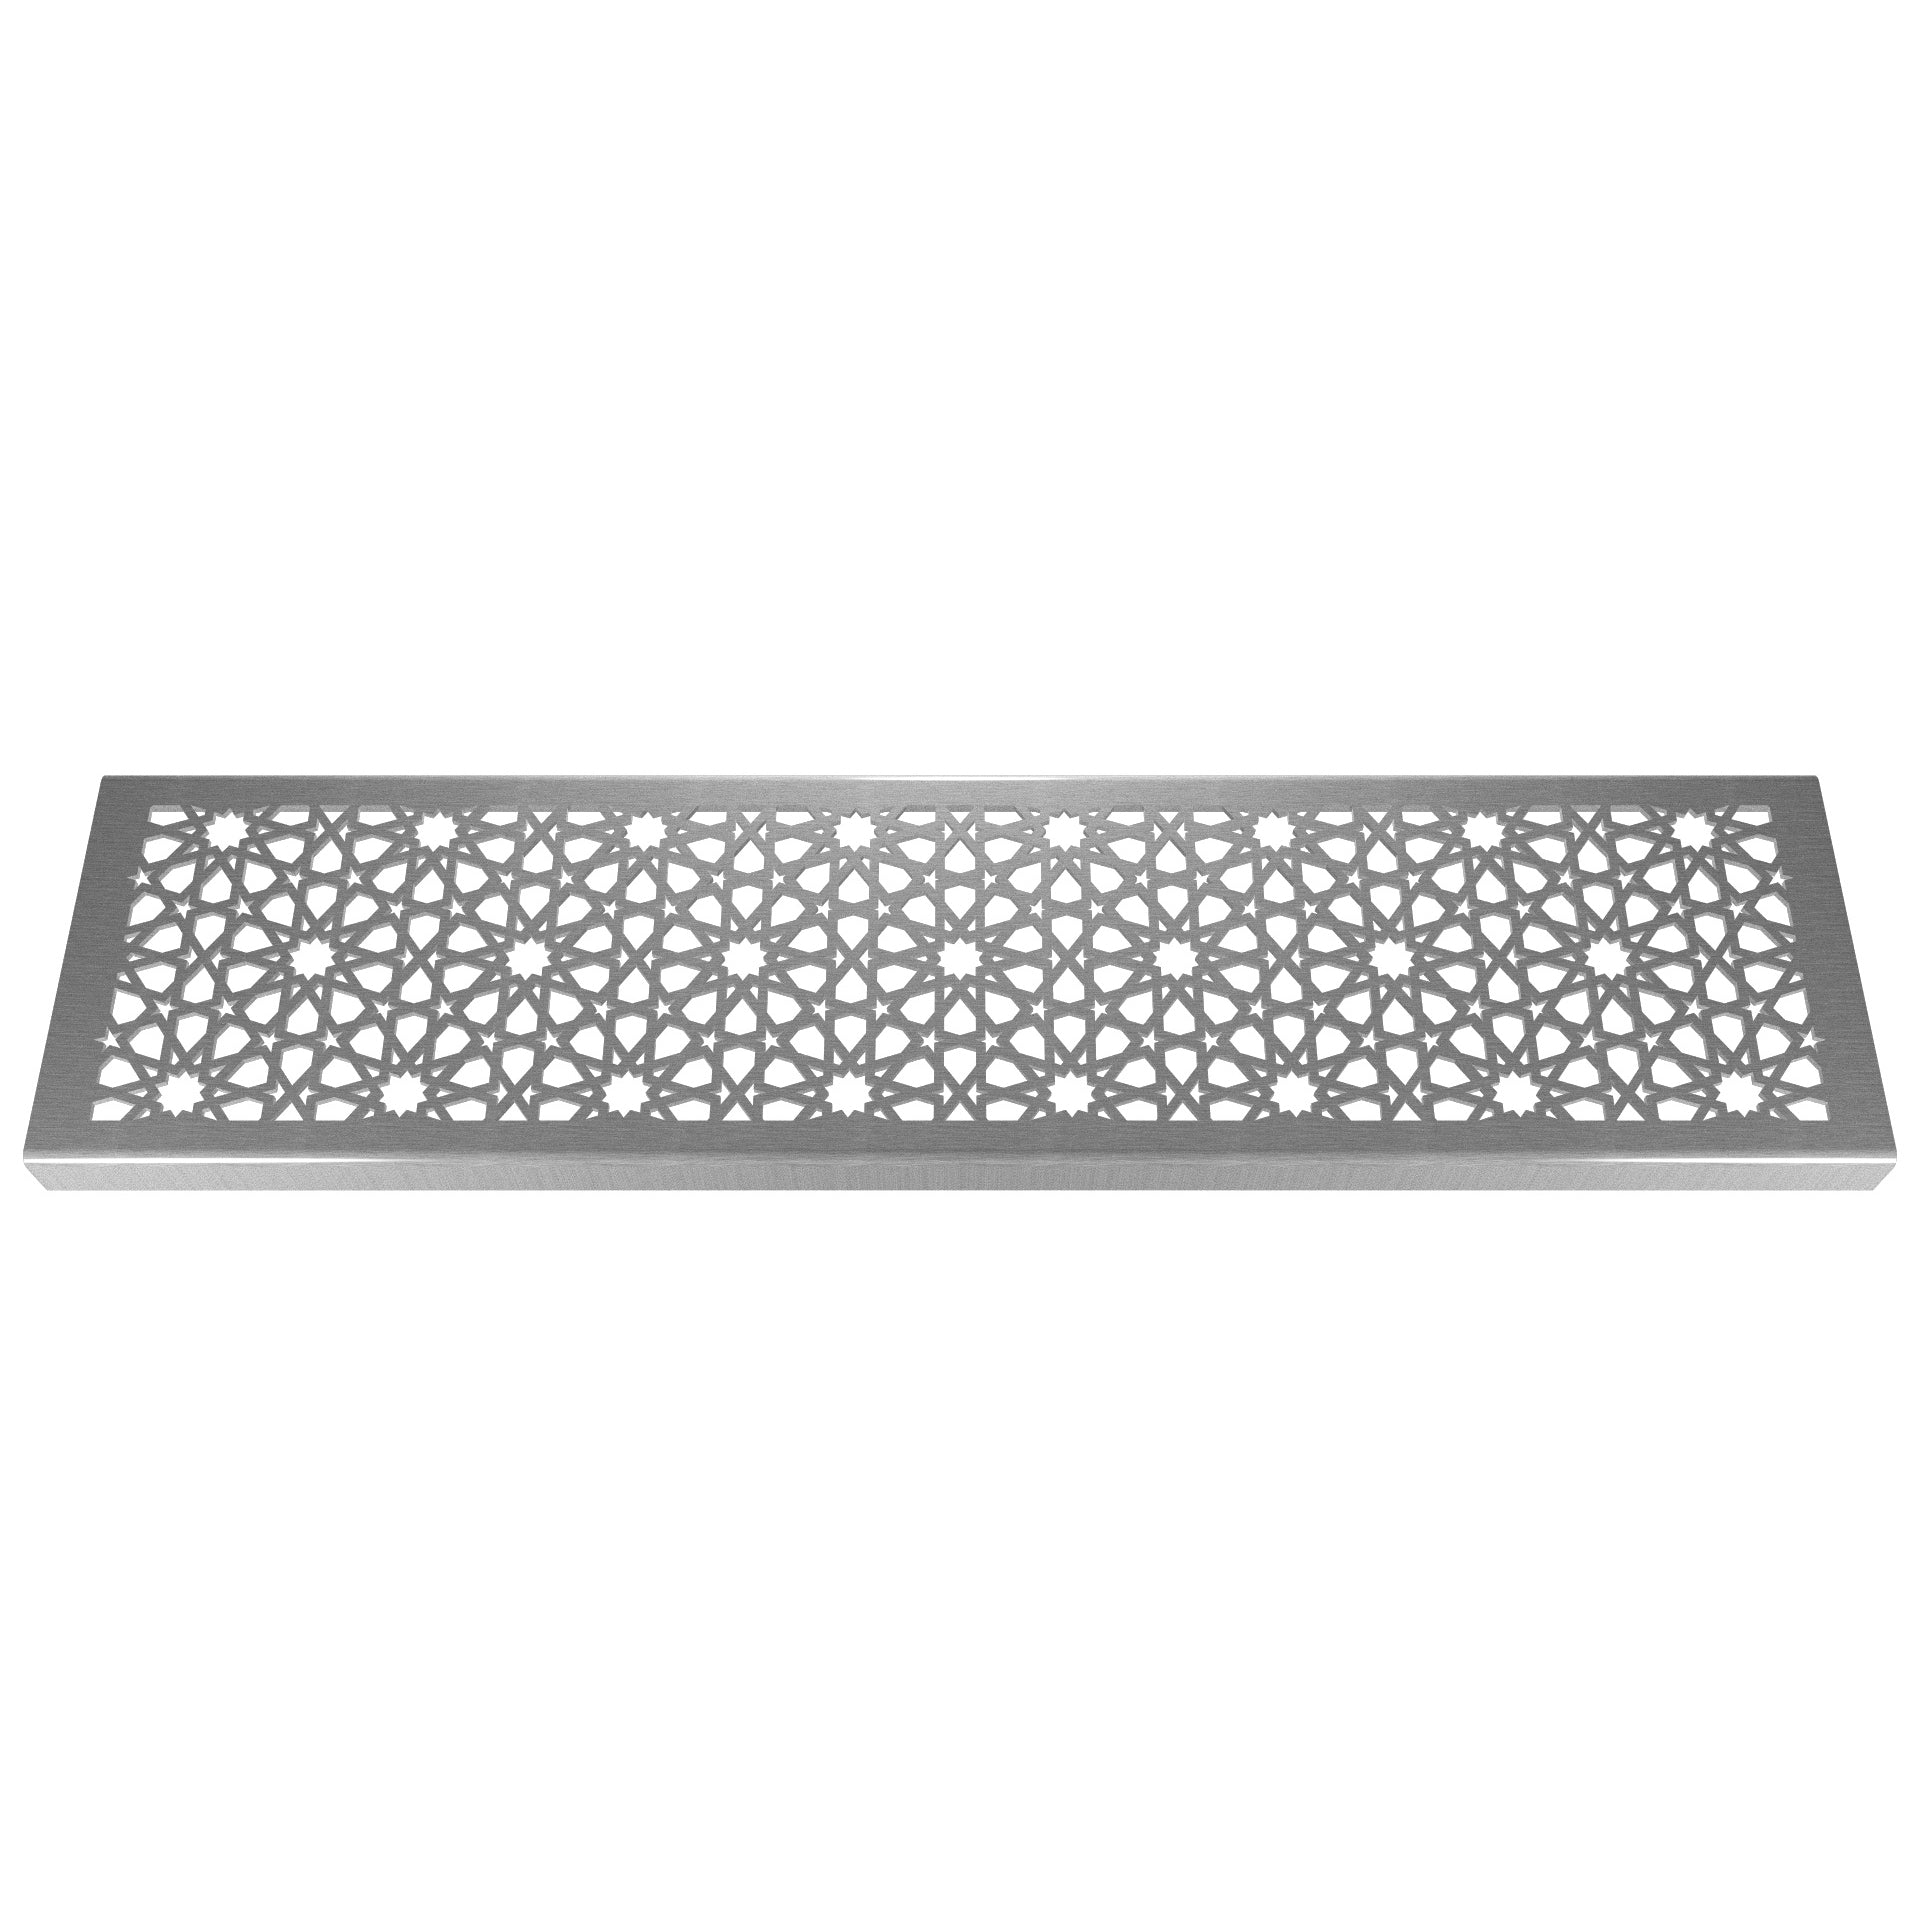 [CLEARANCE] Morisco 304 Stainless Steel Channel Drain Grate 125 x 1250mm (5 Inch)